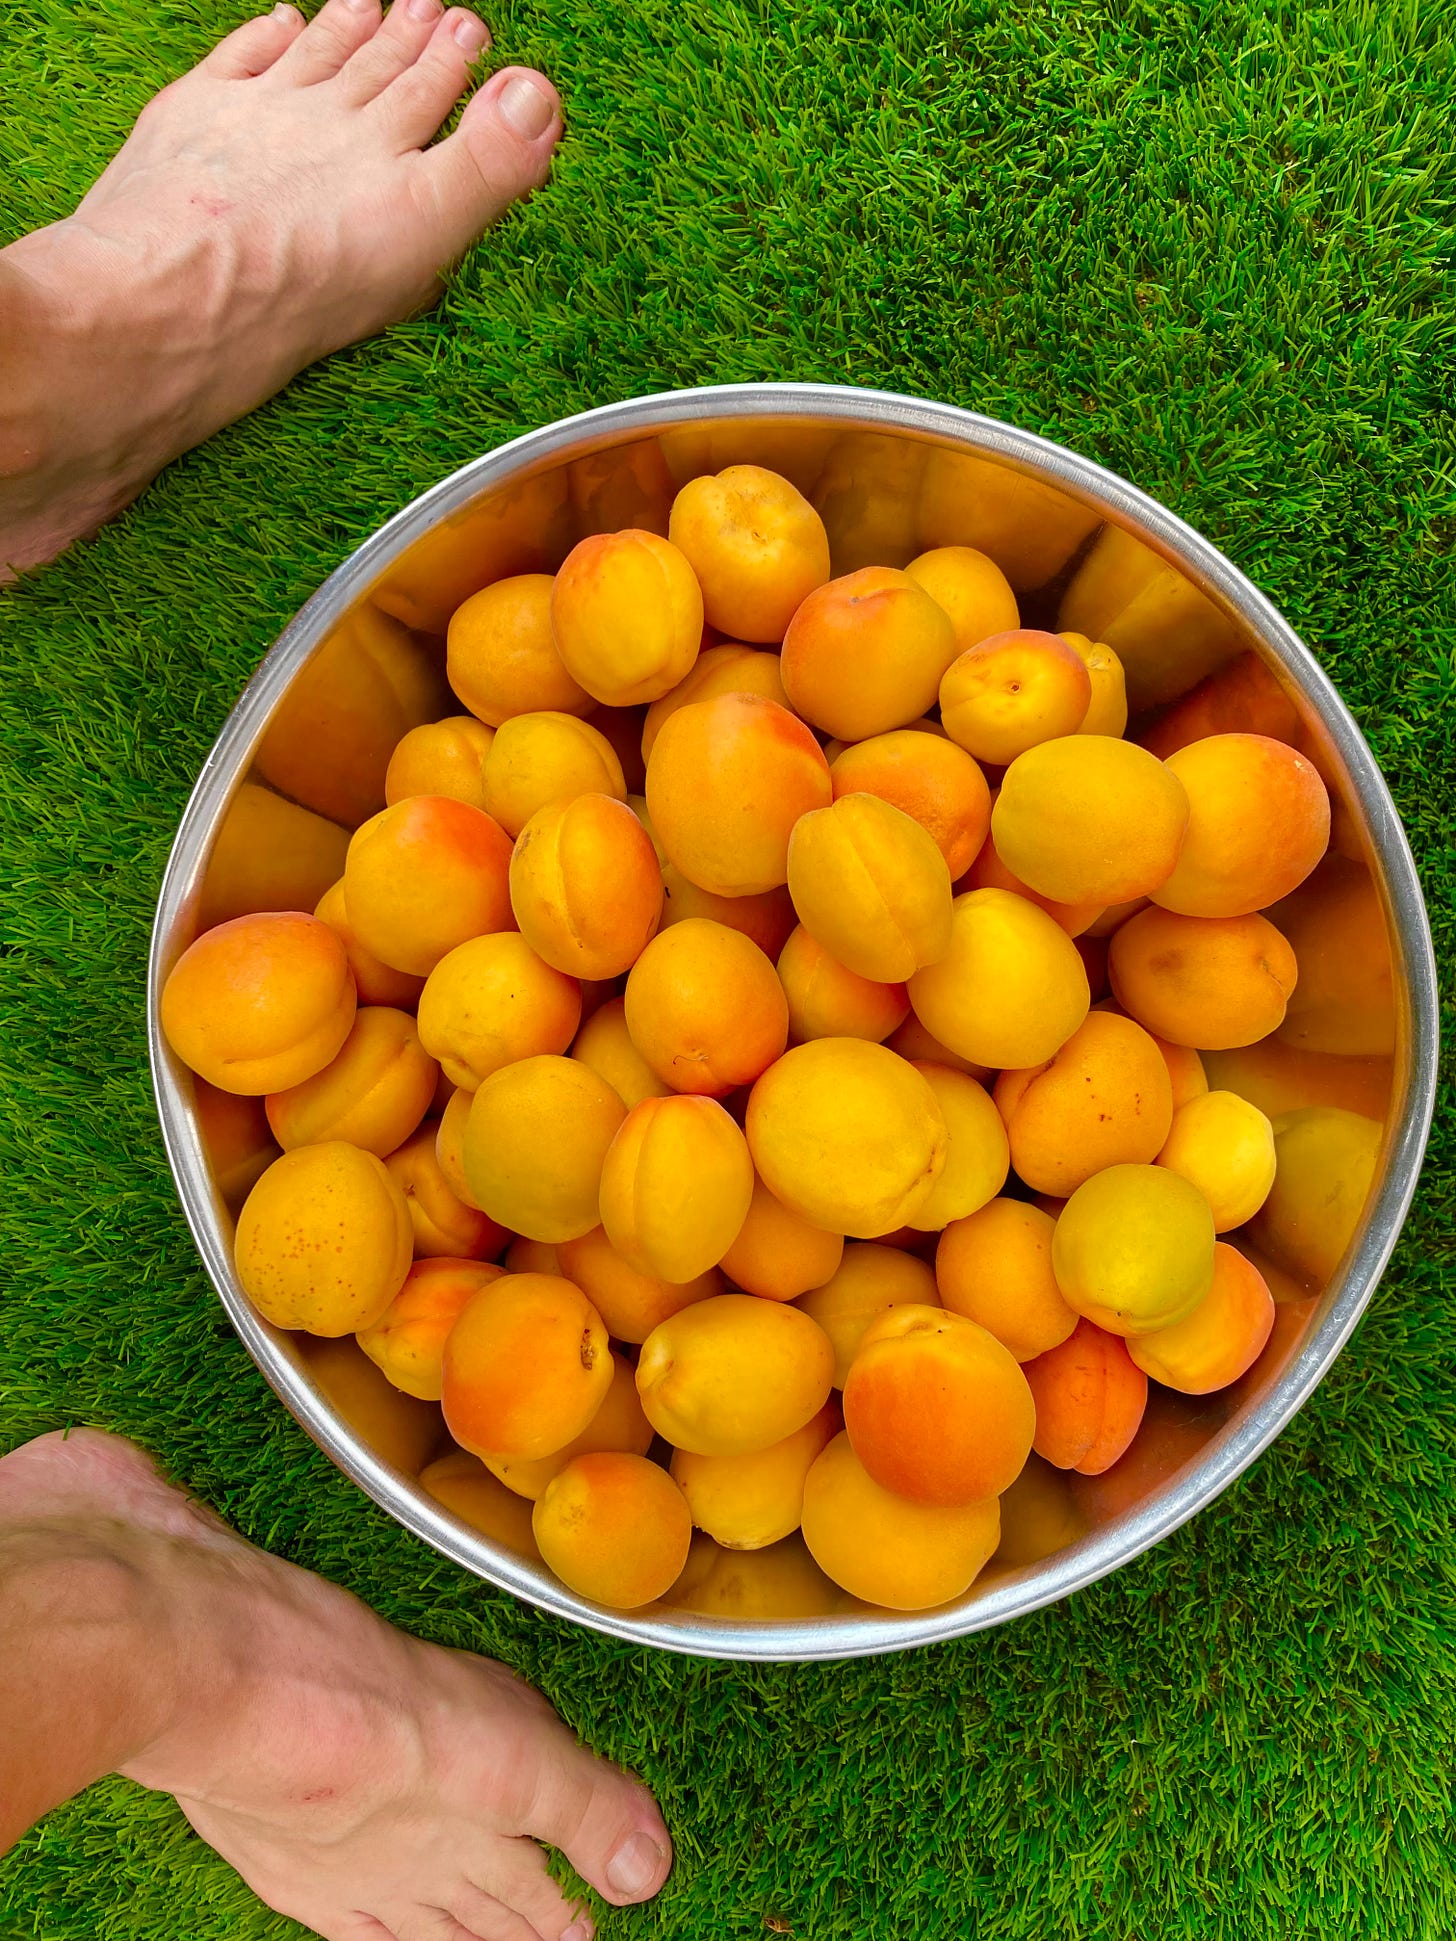 A man's bare feet are on each side of a stainless steel bowl of ripe apricots on fake grass background